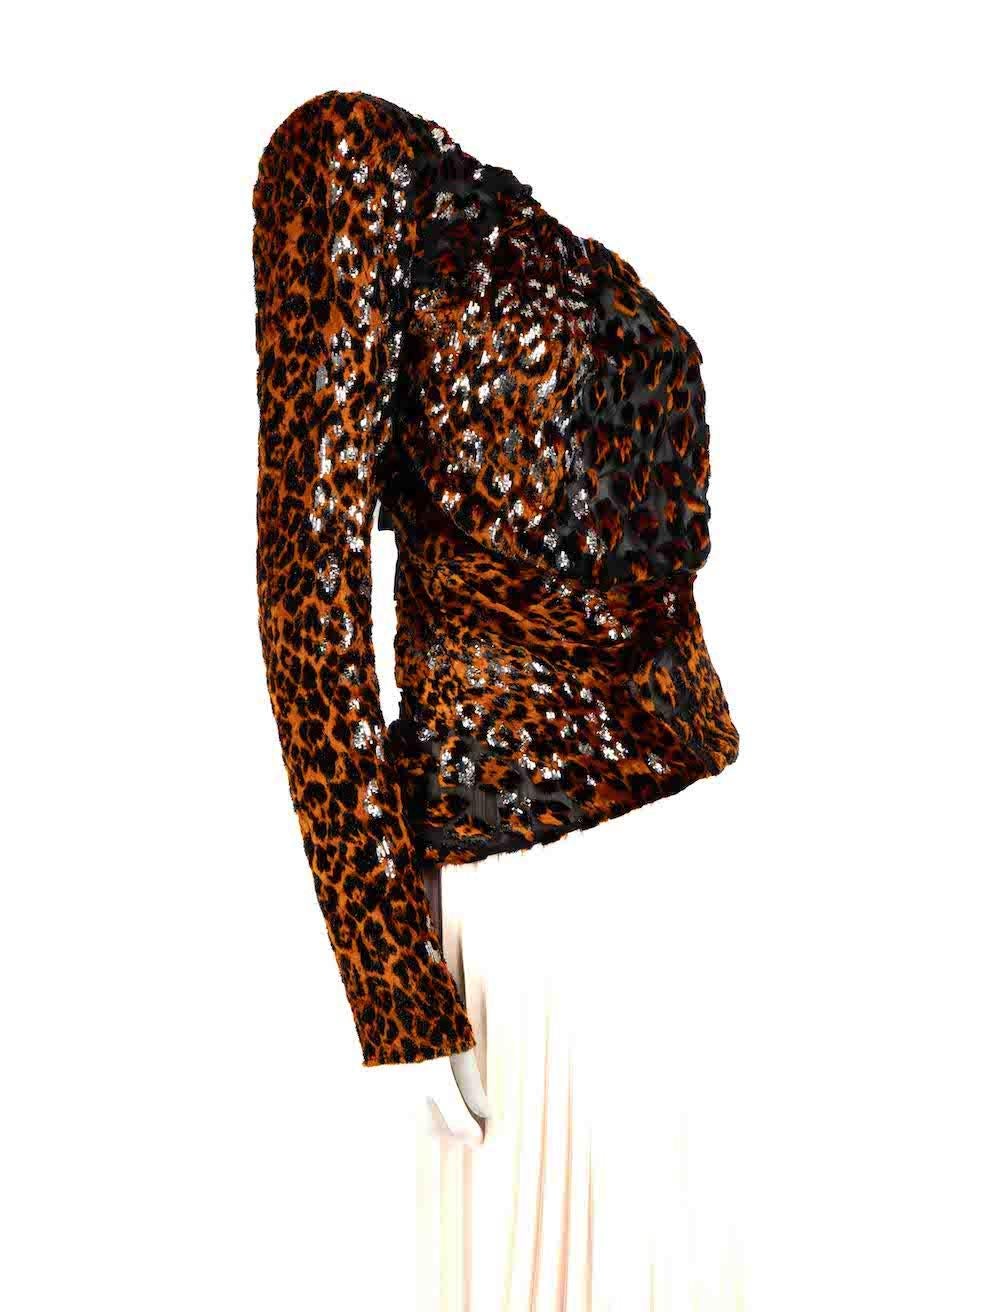 CONDITION is Very good. Hardly any visible wear to top is evident on this used Saint Laurent designer resale item.
 
 
 
 Details
 
 
 Multicolour - black and orange
 
 Velvet
 
 Top
 
 Leopard pattern
 
 Silver metallic threads
 
 One shoulder
 
